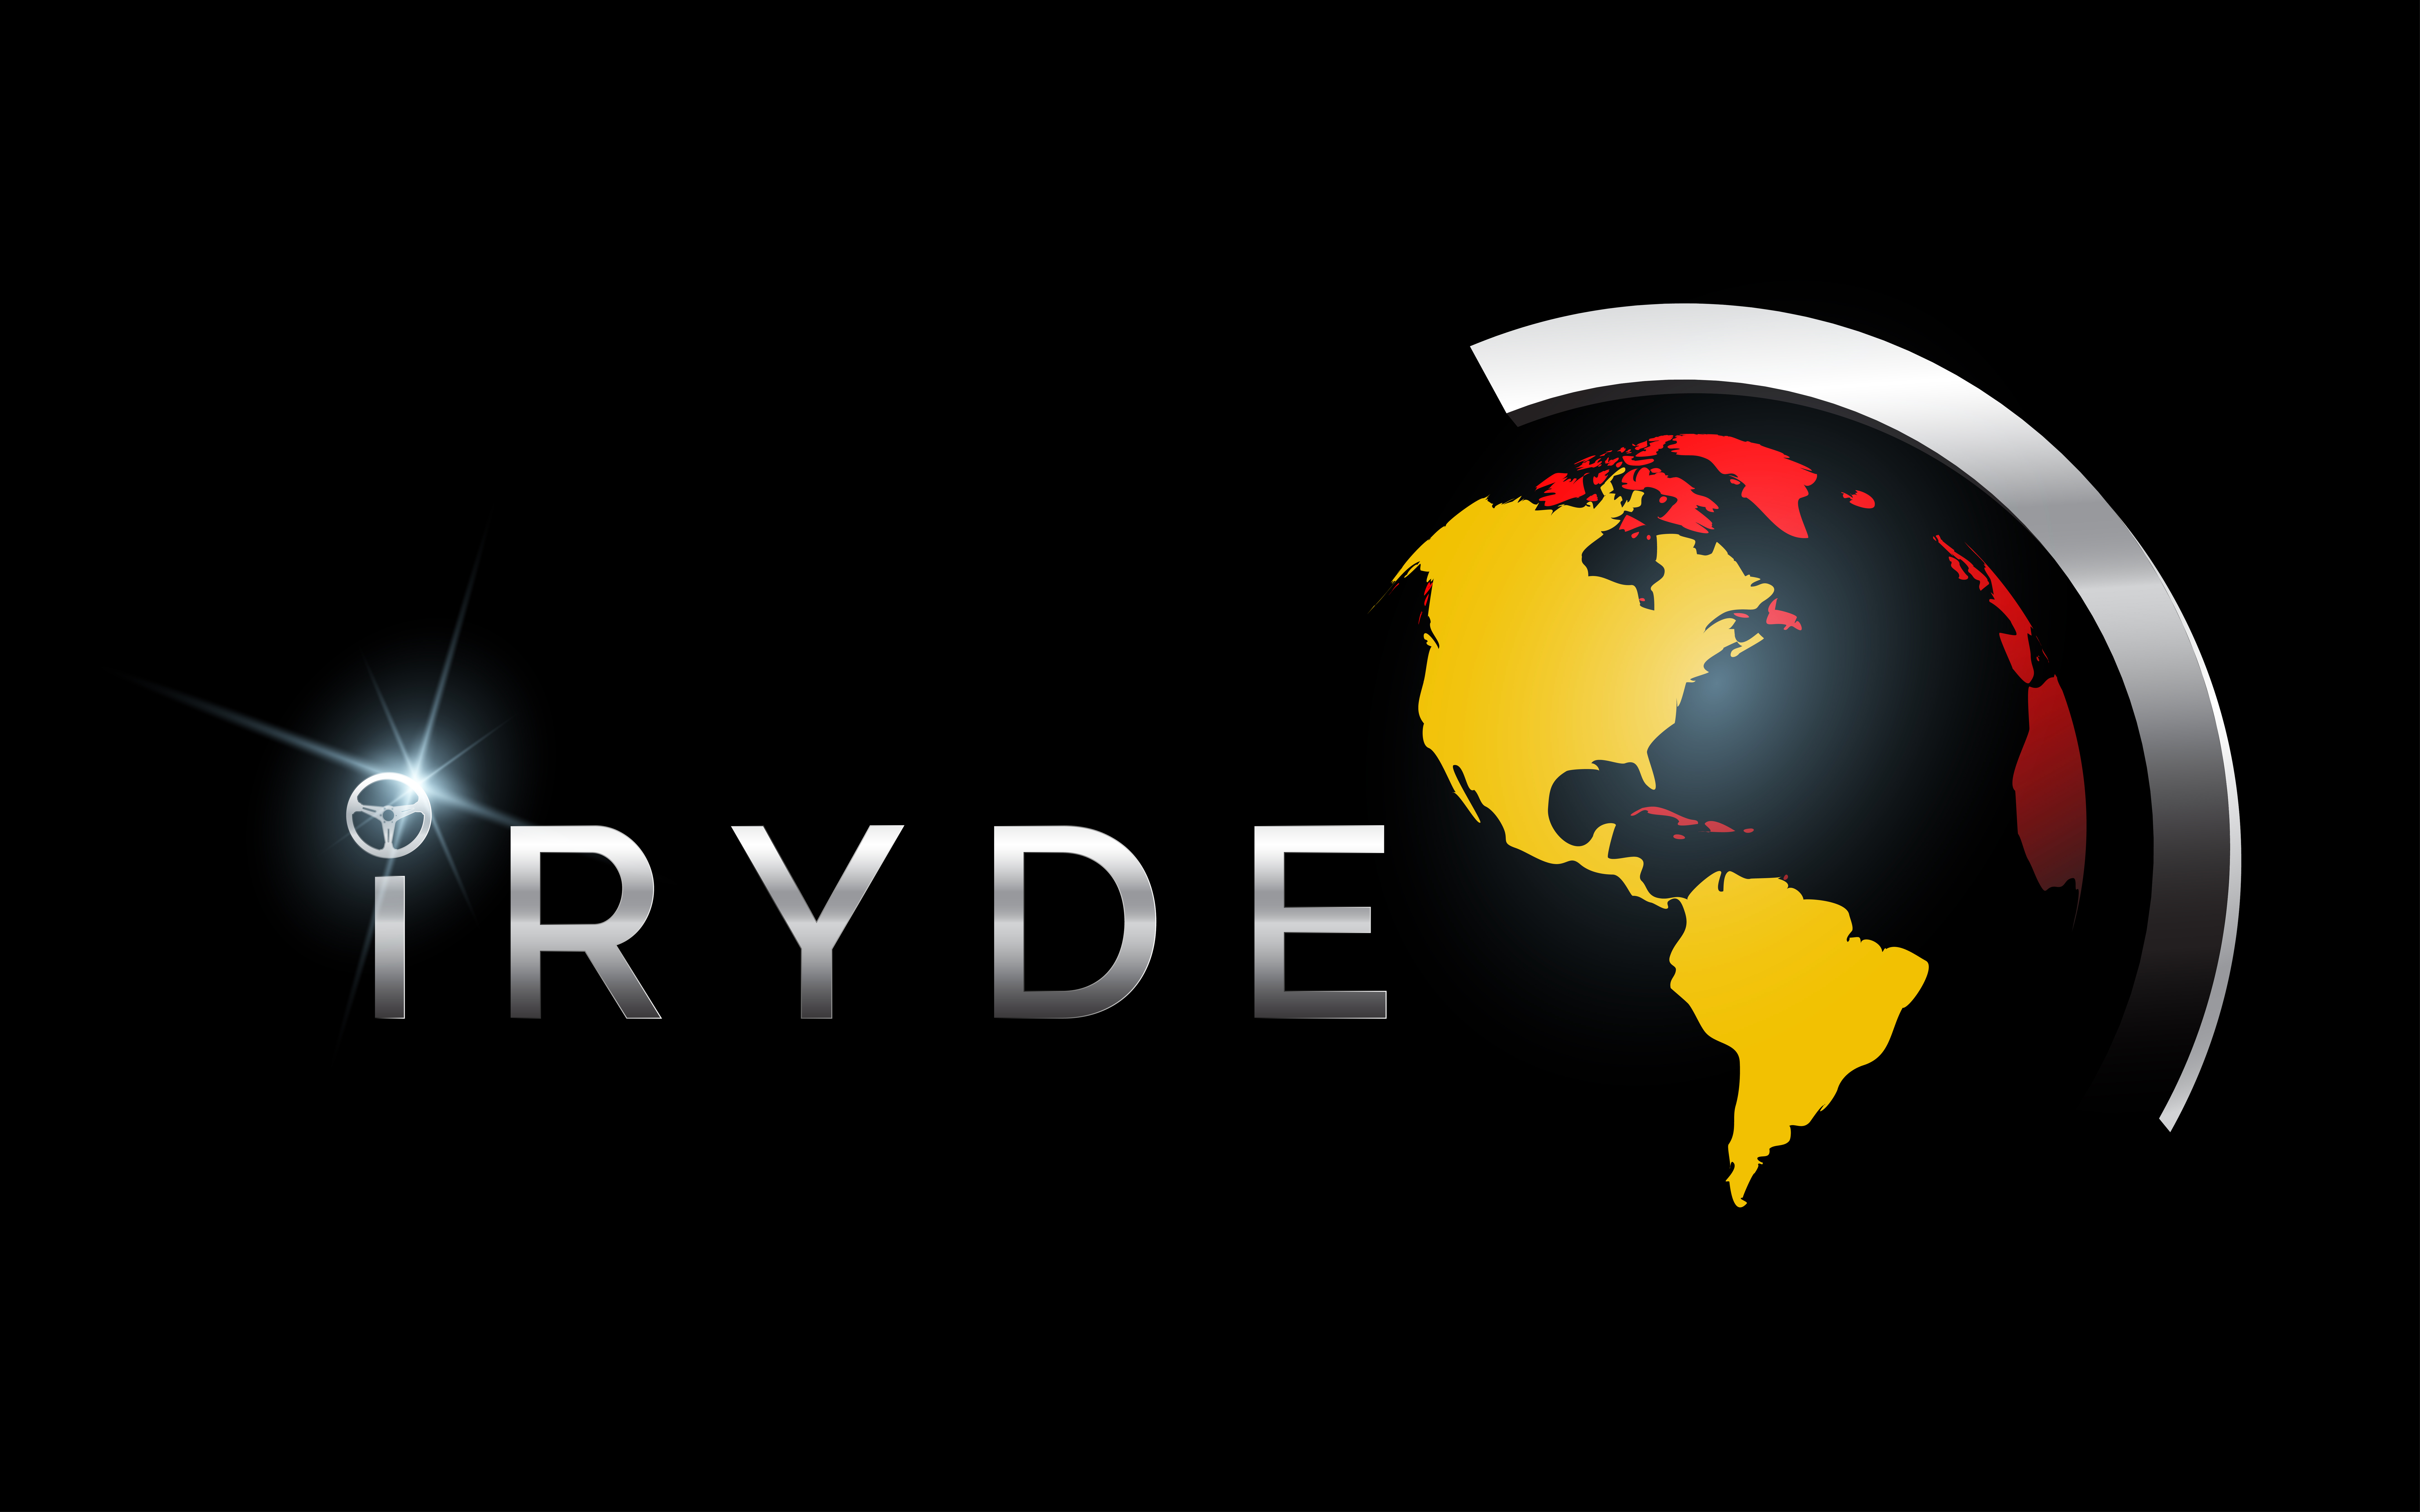 New Ride-Sharing Platform, iRyde Launches on Kickstarter and Promises Superior Safety Measures